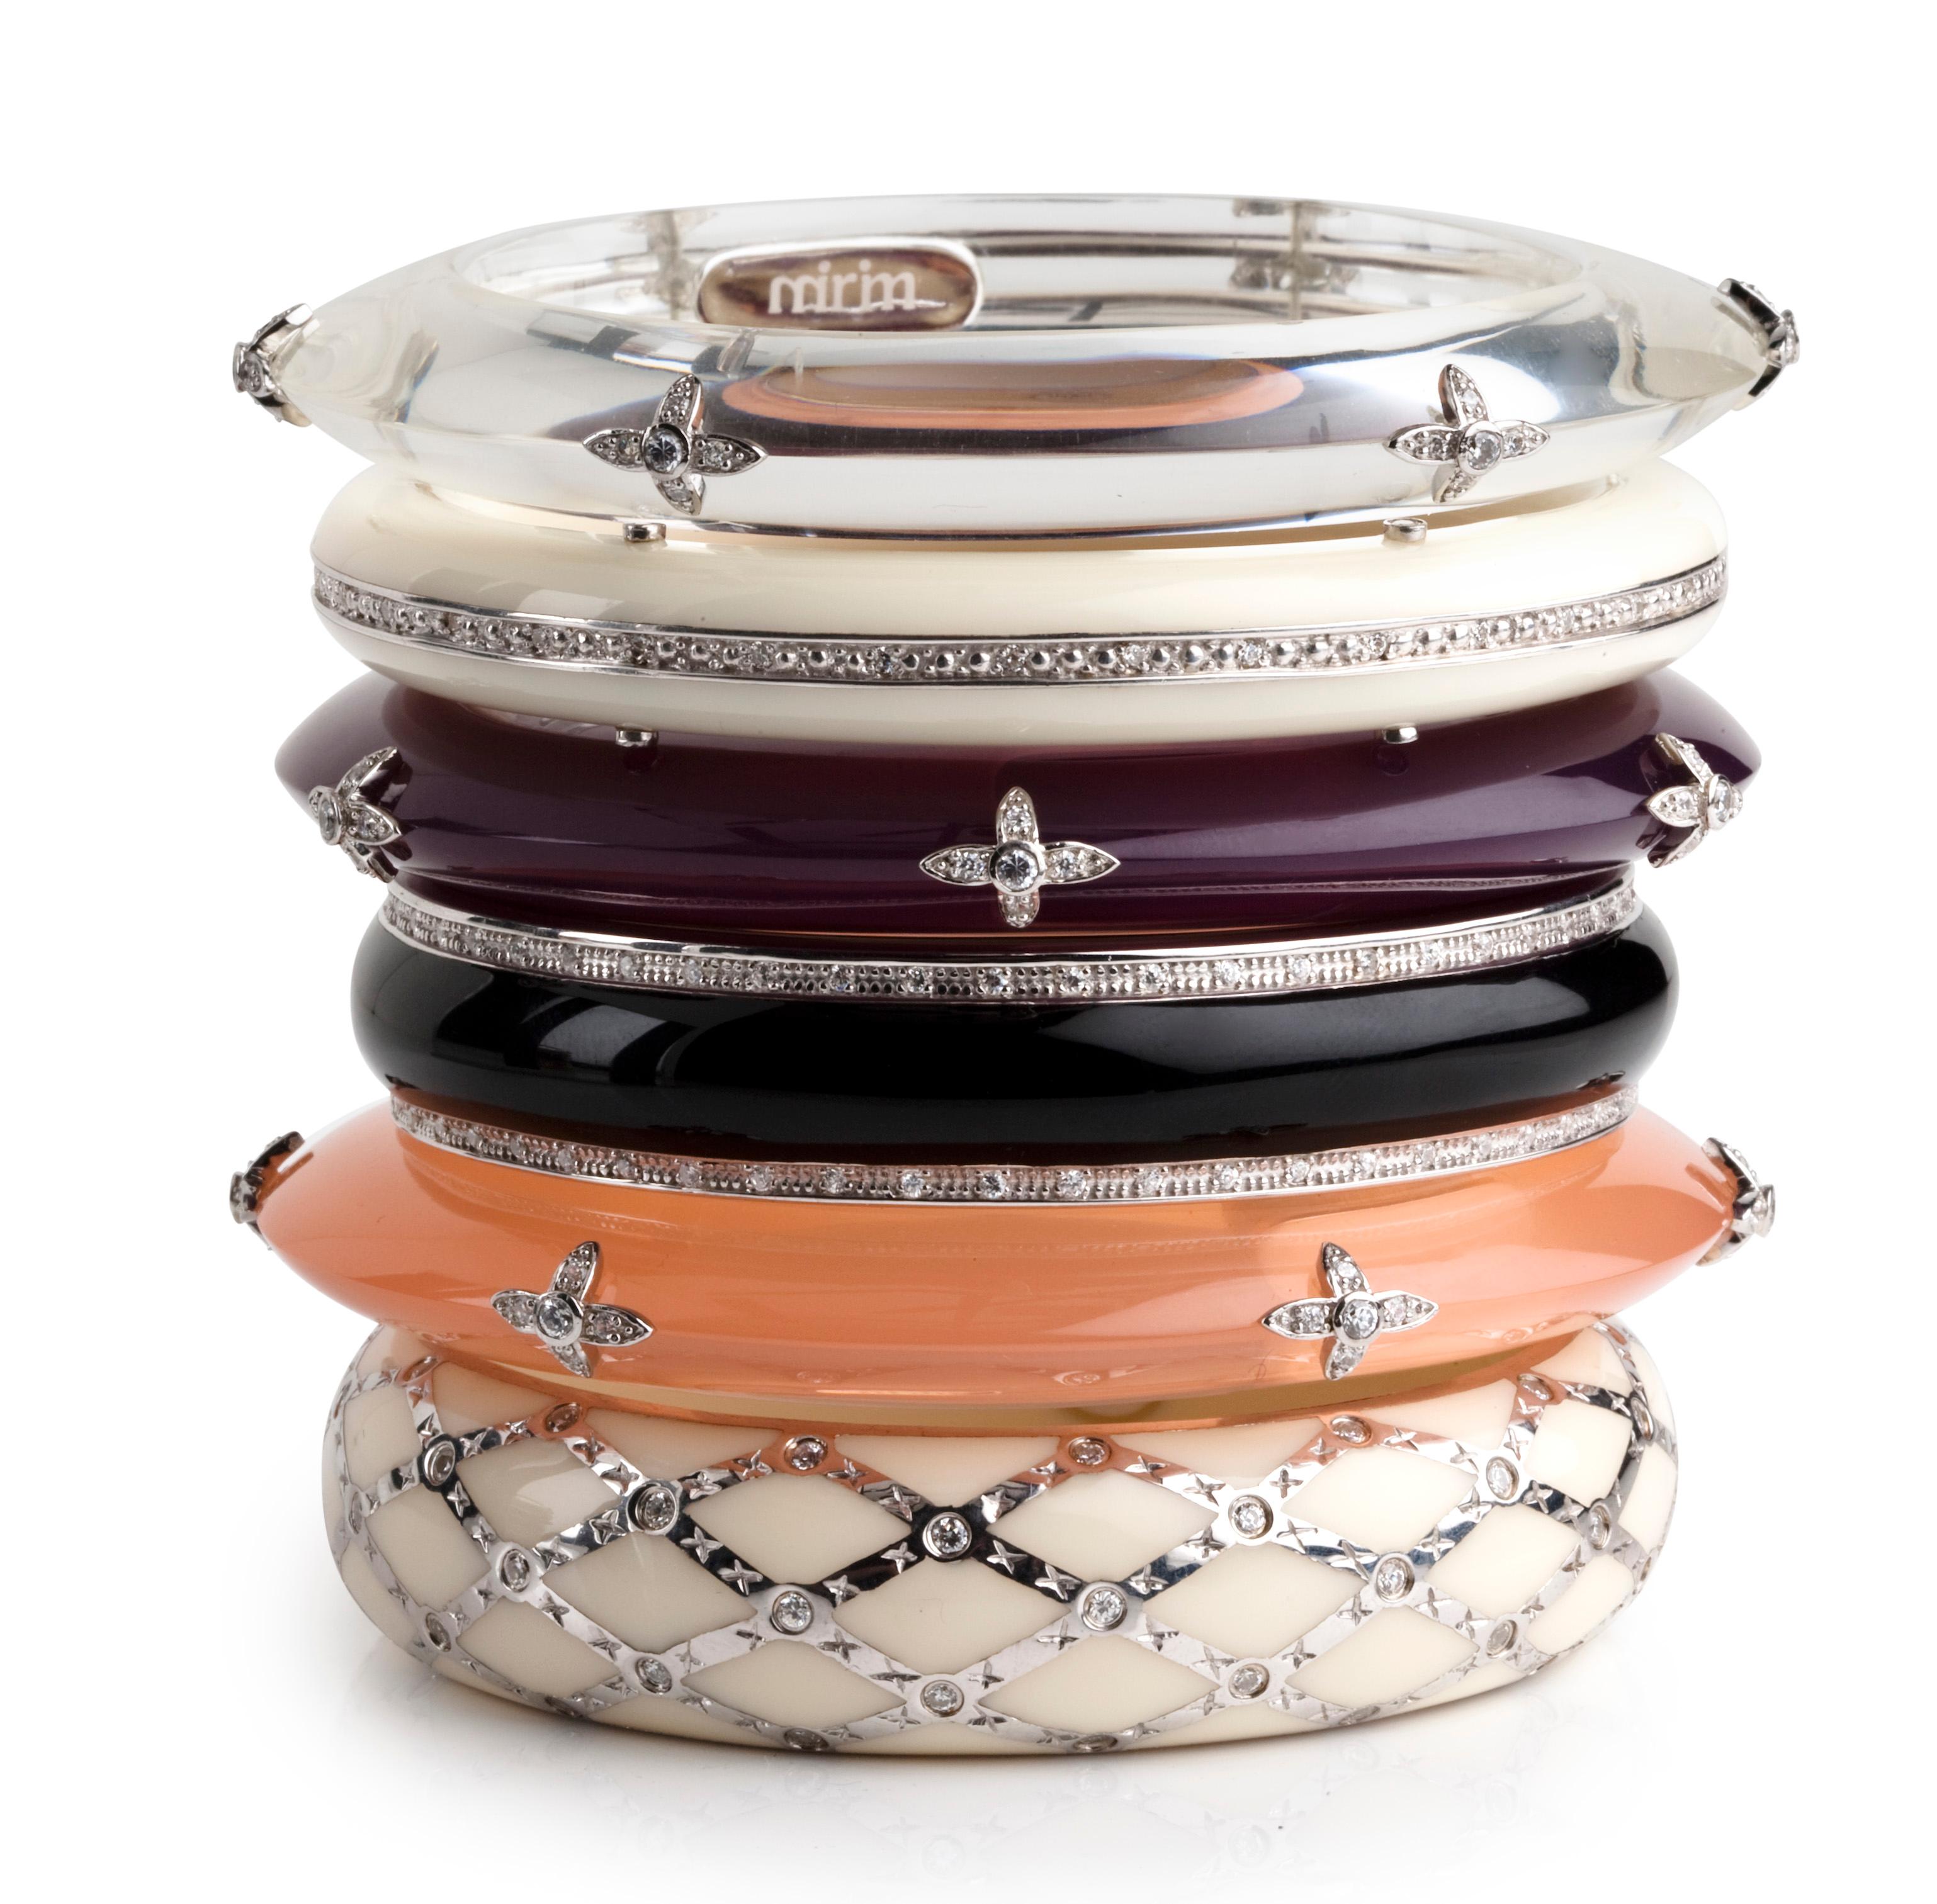 Timeless Miriam Salat bangle featuresmpolished high quality resin with sterling silver.
Perfect item to collect for a stack look. 
measures apx. 6-1/2 inches in circumference and apx. 1-1/2 inches in width. 
Total weight is 65 grams. 
Signed 